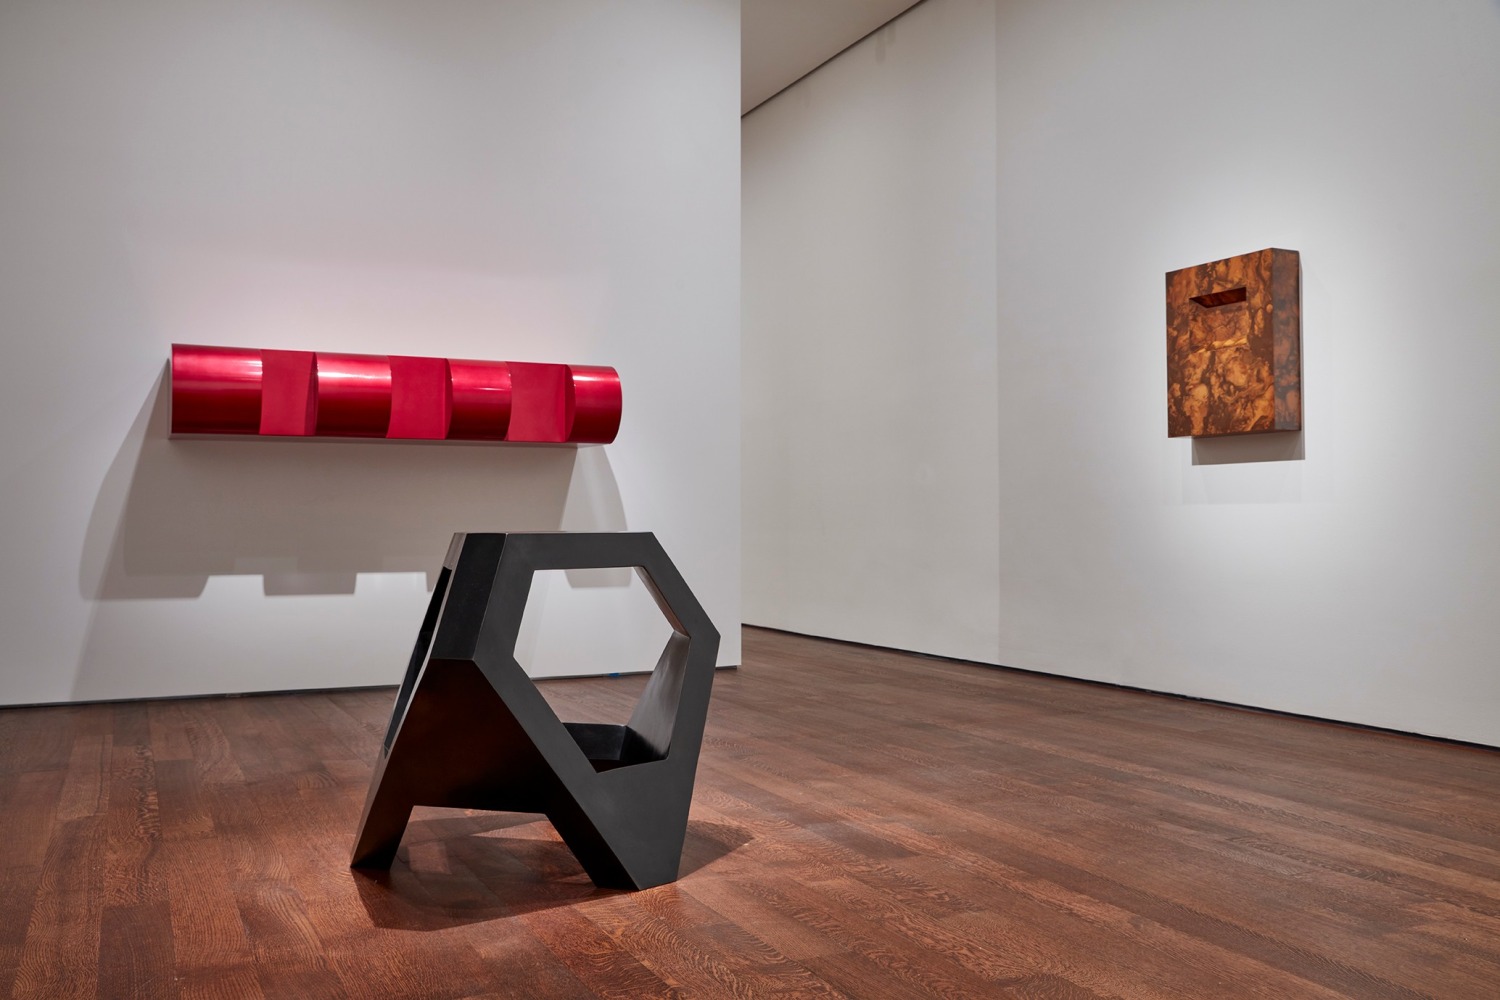 Tony Smith, Generation,&amp;nbsp;1965;&amp;nbsp;Donald Judd,&amp;nbsp;Untitled (DSS #108 - first version),&amp;nbsp;1967;&amp;nbsp;and Richard Artschwager, Small Construction with Indentation,&amp;nbsp;1966, on view in&amp;nbsp;less: minimalism in the 1960s.